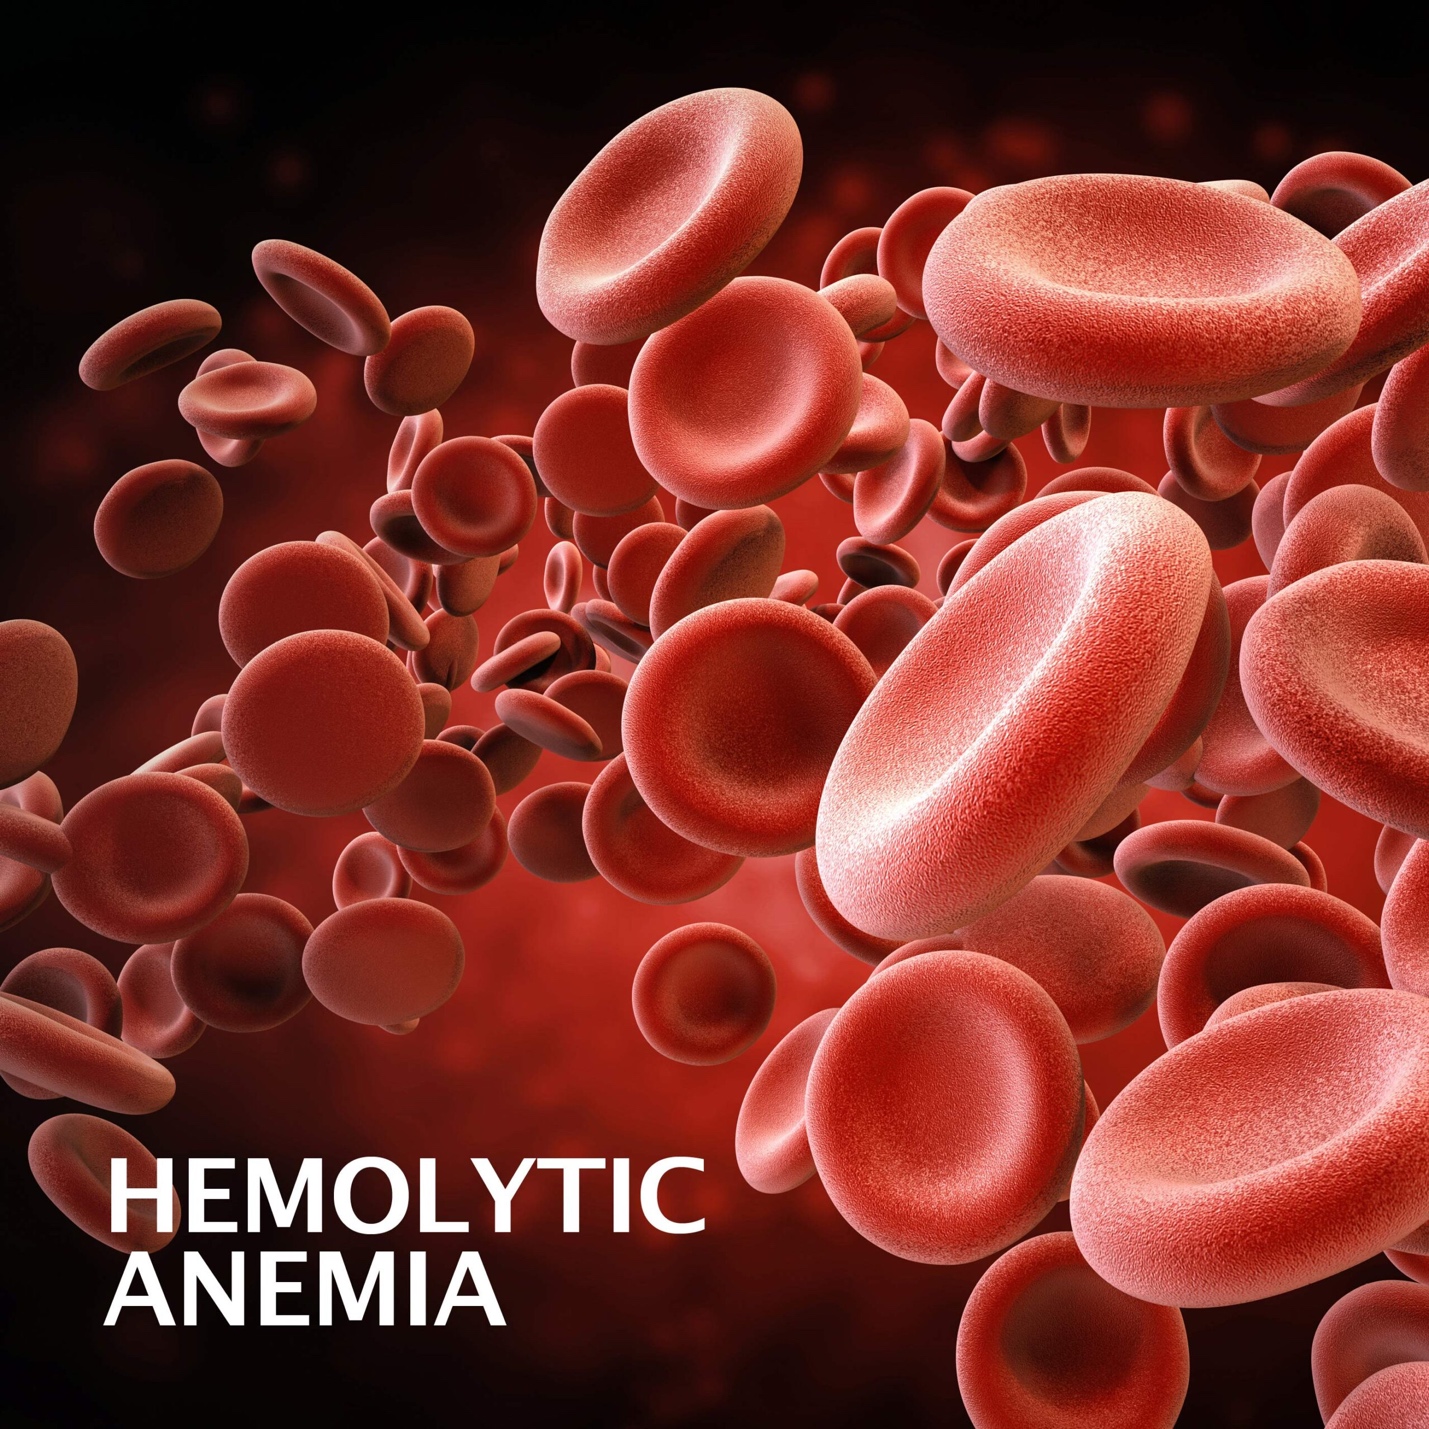 Medical illustration depicting Hemolytic Anemia: Red blood cells breaking apart prematurely, leading to reduced oxygen transport in the bloodstream.